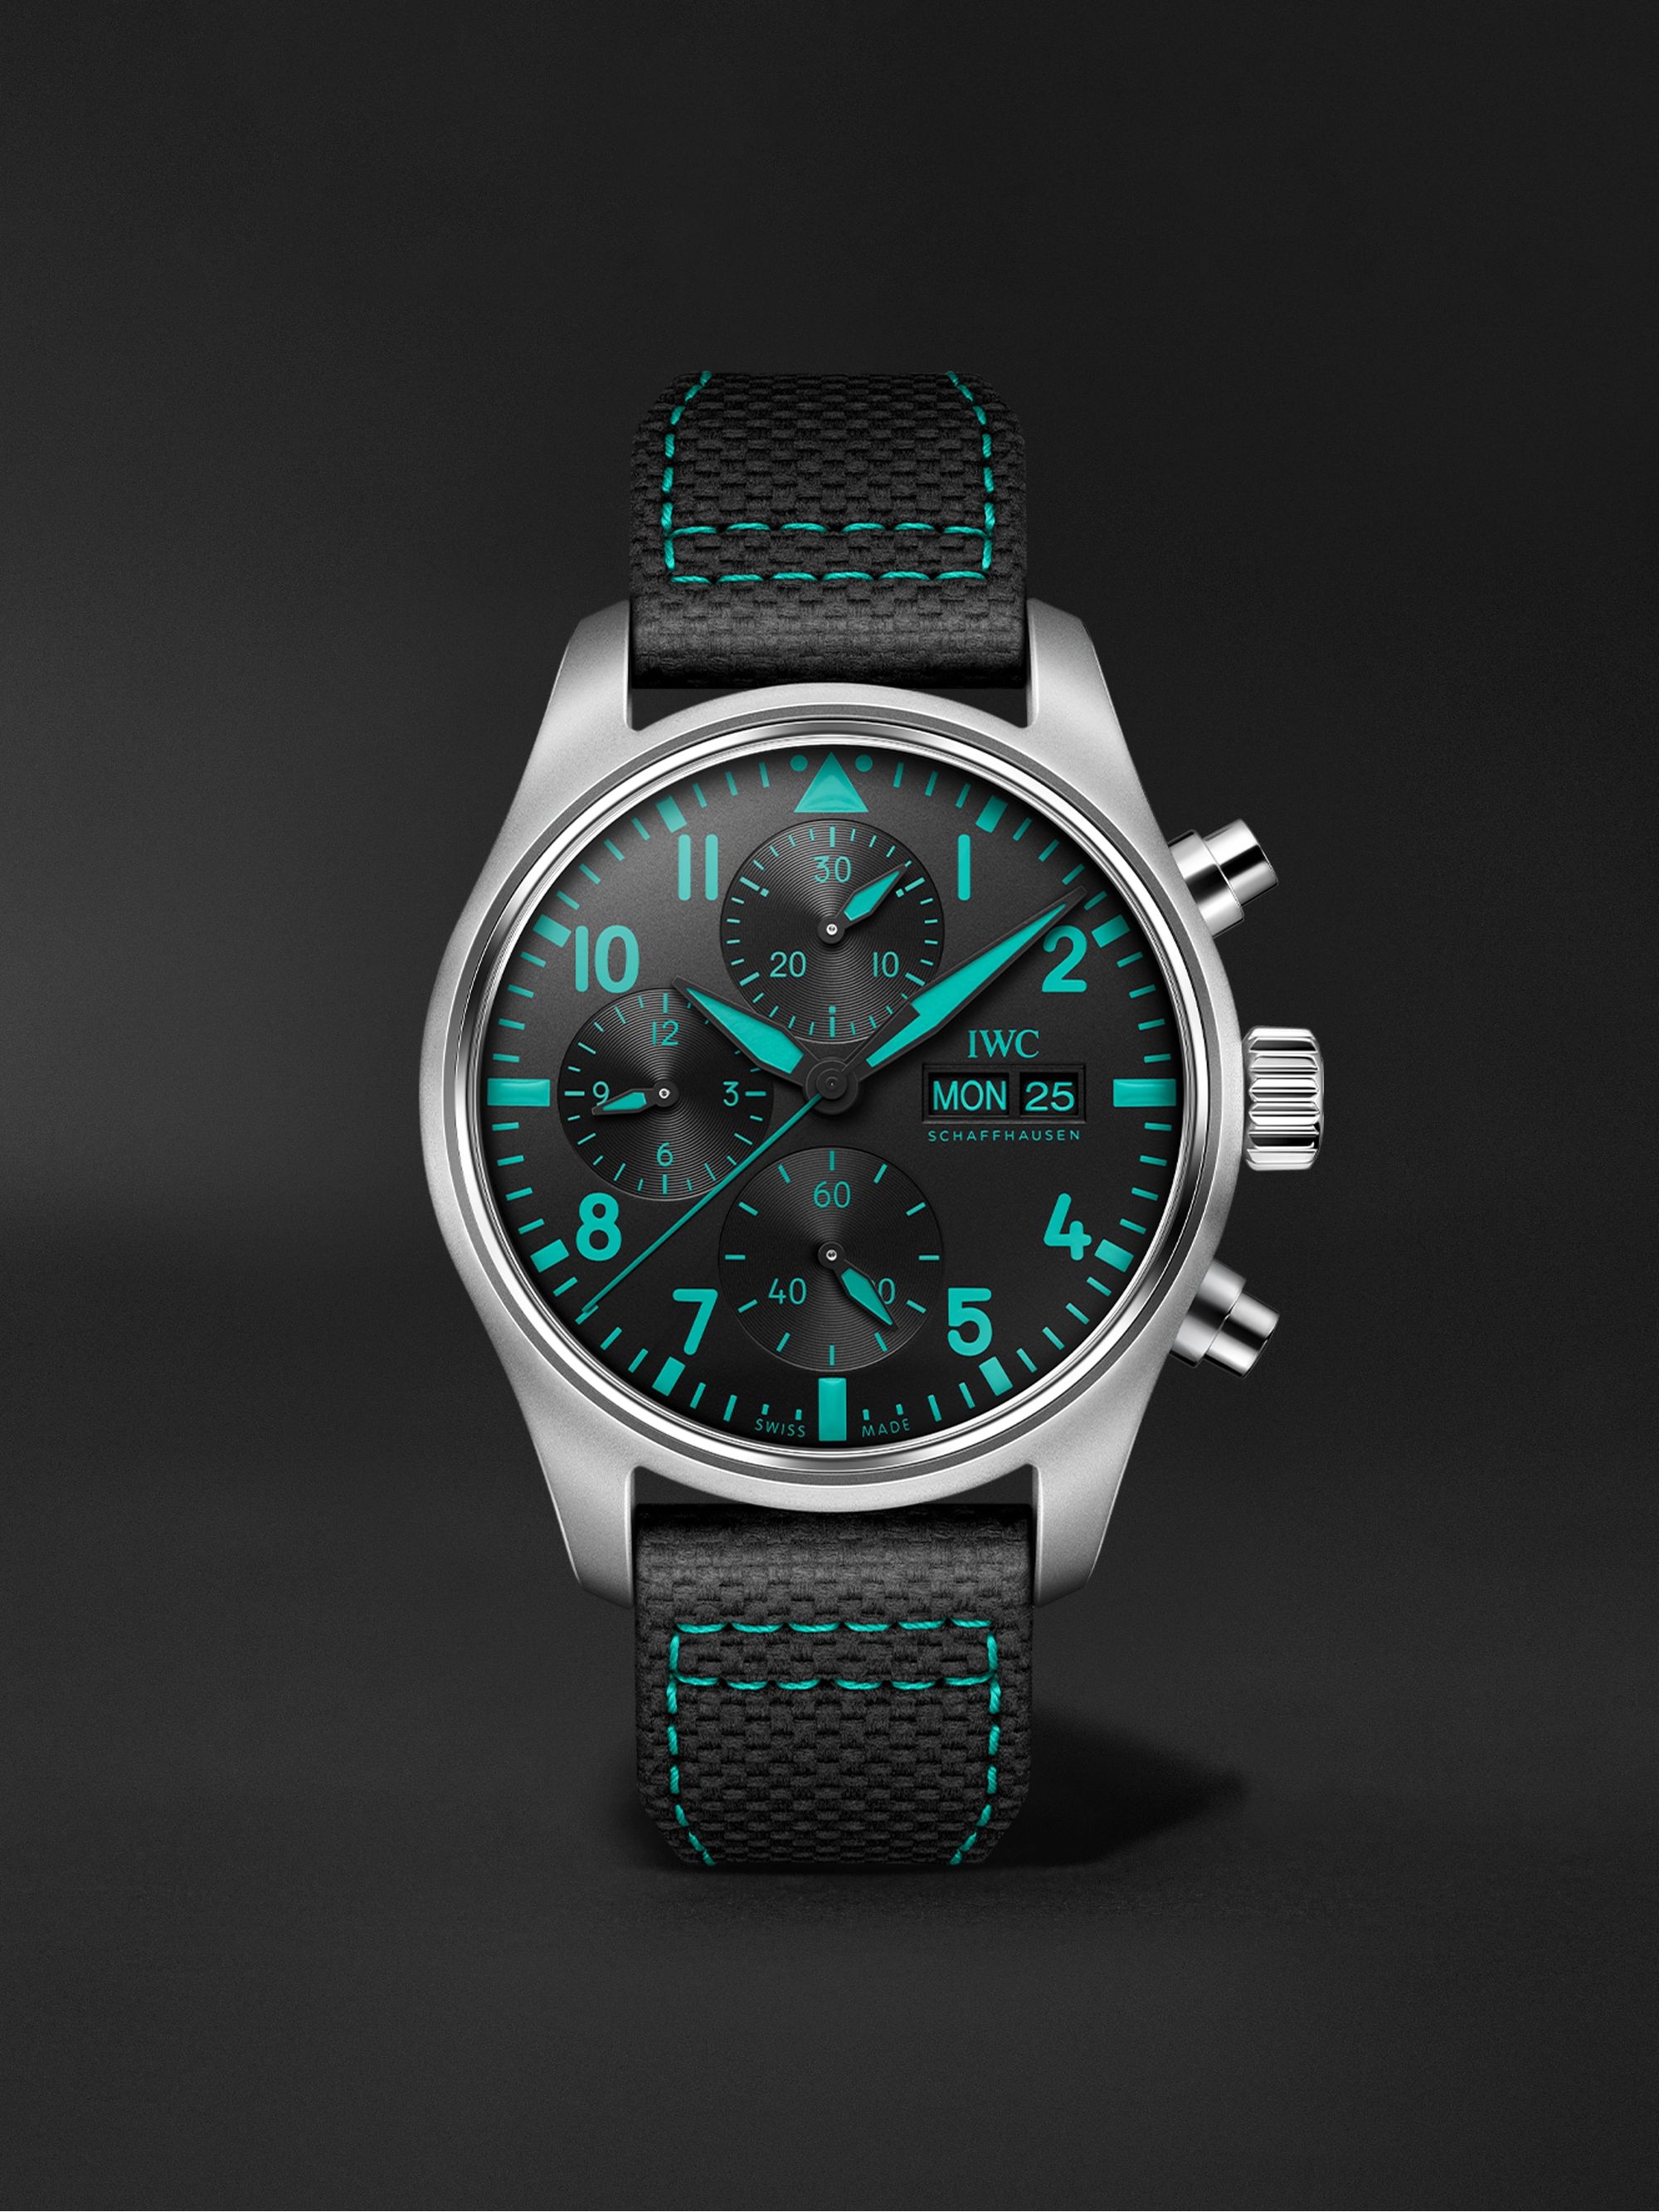 IWC SCHAFFHAUSEN Pilot's Watch Mercedes-AMG Petronas Formula One™ Team Edition Automatic Chronograph 41mm Titanium and Leather Watch, Ref. No. IWIW388108